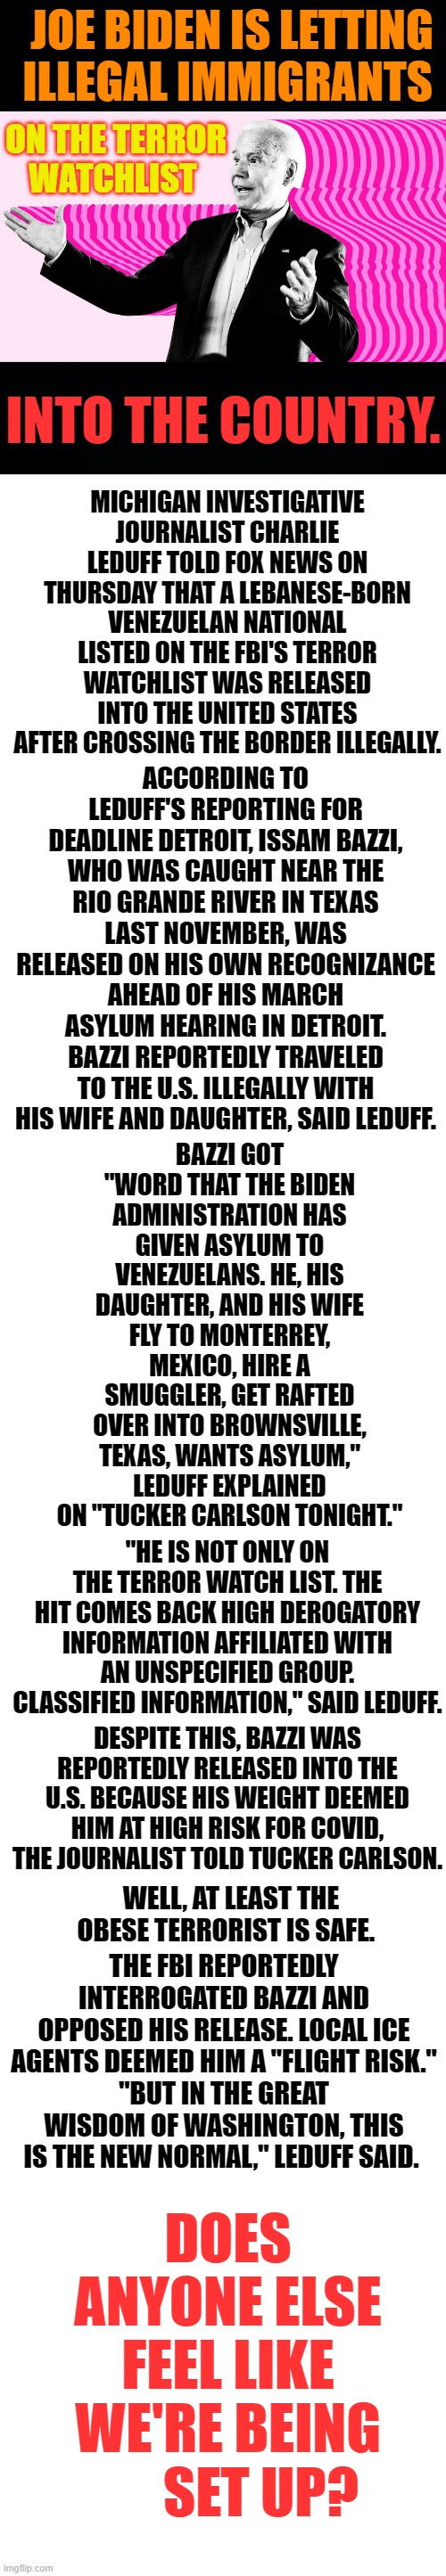 I Don't Know Why We Should Expect Anything Else... | JOE BIDEN IS LETTING ILLEGAL IMMIGRANTS; ON THE TERROR WATCHLIST; INTO THE COUNTRY. MICHIGAN INVESTIGATIVE JOURNALIST CHARLIE LEDUFF TOLD FOX NEWS ON THURSDAY THAT A LEBANESE-BORN VENEZUELAN NATIONAL LISTED ON THE FBI'S TERROR WATCHLIST WAS RELEASED INTO THE UNITED STATES AFTER CROSSING THE BORDER ILLEGALLY. ACCORDING TO LEDUFF'S REPORTING FOR DEADLINE DETROIT, ISSAM BAZZI, WHO WAS CAUGHT NEAR THE RIO GRANDE RIVER IN TEXAS LAST NOVEMBER, WAS RELEASED ON HIS OWN RECOGNIZANCE AHEAD OF HIS MARCH ASYLUM HEARING IN DETROIT. BAZZI REPORTEDLY TRAVELED TO THE U.S. ILLEGALLY WITH HIS WIFE AND DAUGHTER, SAID LEDUFF. BAZZI GOT "WORD THAT THE BIDEN ADMINISTRATION HAS GIVEN ASYLUM TO VENEZUELANS. HE, HIS DAUGHTER, AND HIS WIFE FLY TO MONTERREY, MEXICO, HIRE A SMUGGLER, GET RAFTED OVER INTO BROWNSVILLE, TEXAS, WANTS ASYLUM," LEDUFF EXPLAINED ON "TUCKER CARLSON TONIGHT."; "HE IS NOT ONLY ON THE TERROR WATCH LIST. THE HIT COMES BACK HIGH DEROGATORY INFORMATION AFFILIATED WITH AN UNSPECIFIED GROUP. CLASSIFIED INFORMATION," SAID LEDUFF. DESPITE THIS, BAZZI WAS REPORTEDLY RELEASED INTO THE U.S. BECAUSE HIS WEIGHT DEEMED HIM AT HIGH RISK FOR COVID, THE JOURNALIST TOLD TUCKER CARLSON. THE FBI REPORTEDLY INTERROGATED BAZZI AND OPPOSED HIS RELEASE. LOCAL ICE AGENTS DEEMED HIM A "FLIGHT RISK."
"BUT IN THE GREAT WISDOM OF WASHINGTON, THIS IS THE NEW NORMAL," LEDUFF SAID. WELL, AT LEAST THE OBESE TERRORIST IS SAFE. DOES ANYONE ELSE FEEL LIKE WE'RE BEING       SET UP? | image tagged in memes,politics,joe biden,admit it,terrorists,coming to america | made w/ Imgflip meme maker